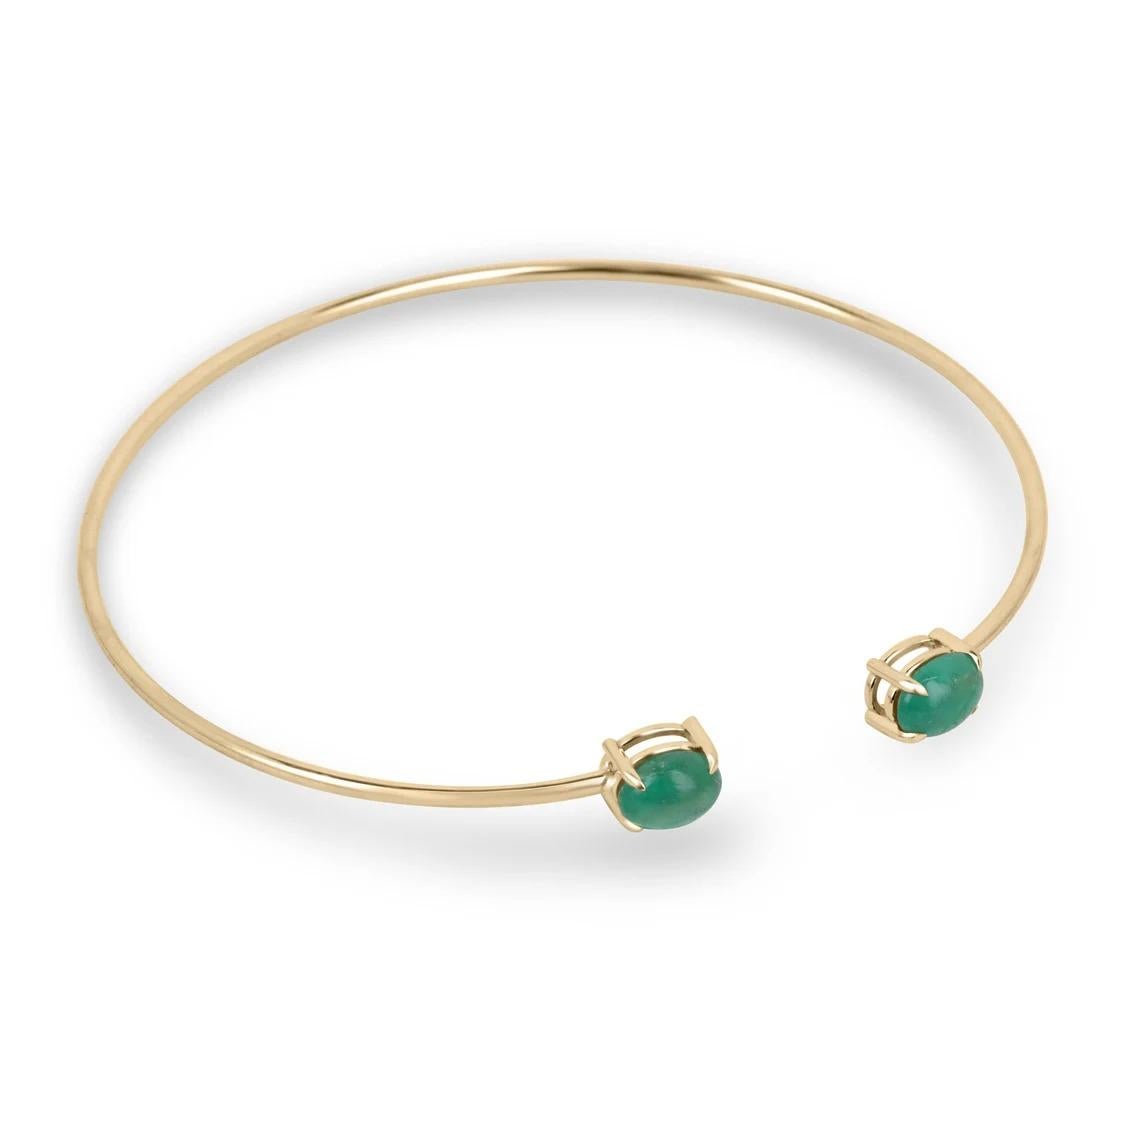 The toi et moi cuff bangle bracelet is a stunning piece of jewelry that symbolizes the intertwining of two individuals. This exquisite bracelet features two oval shaped cabochon emeralds, weighing a total of 2.65 carats, set in a four-claw prong